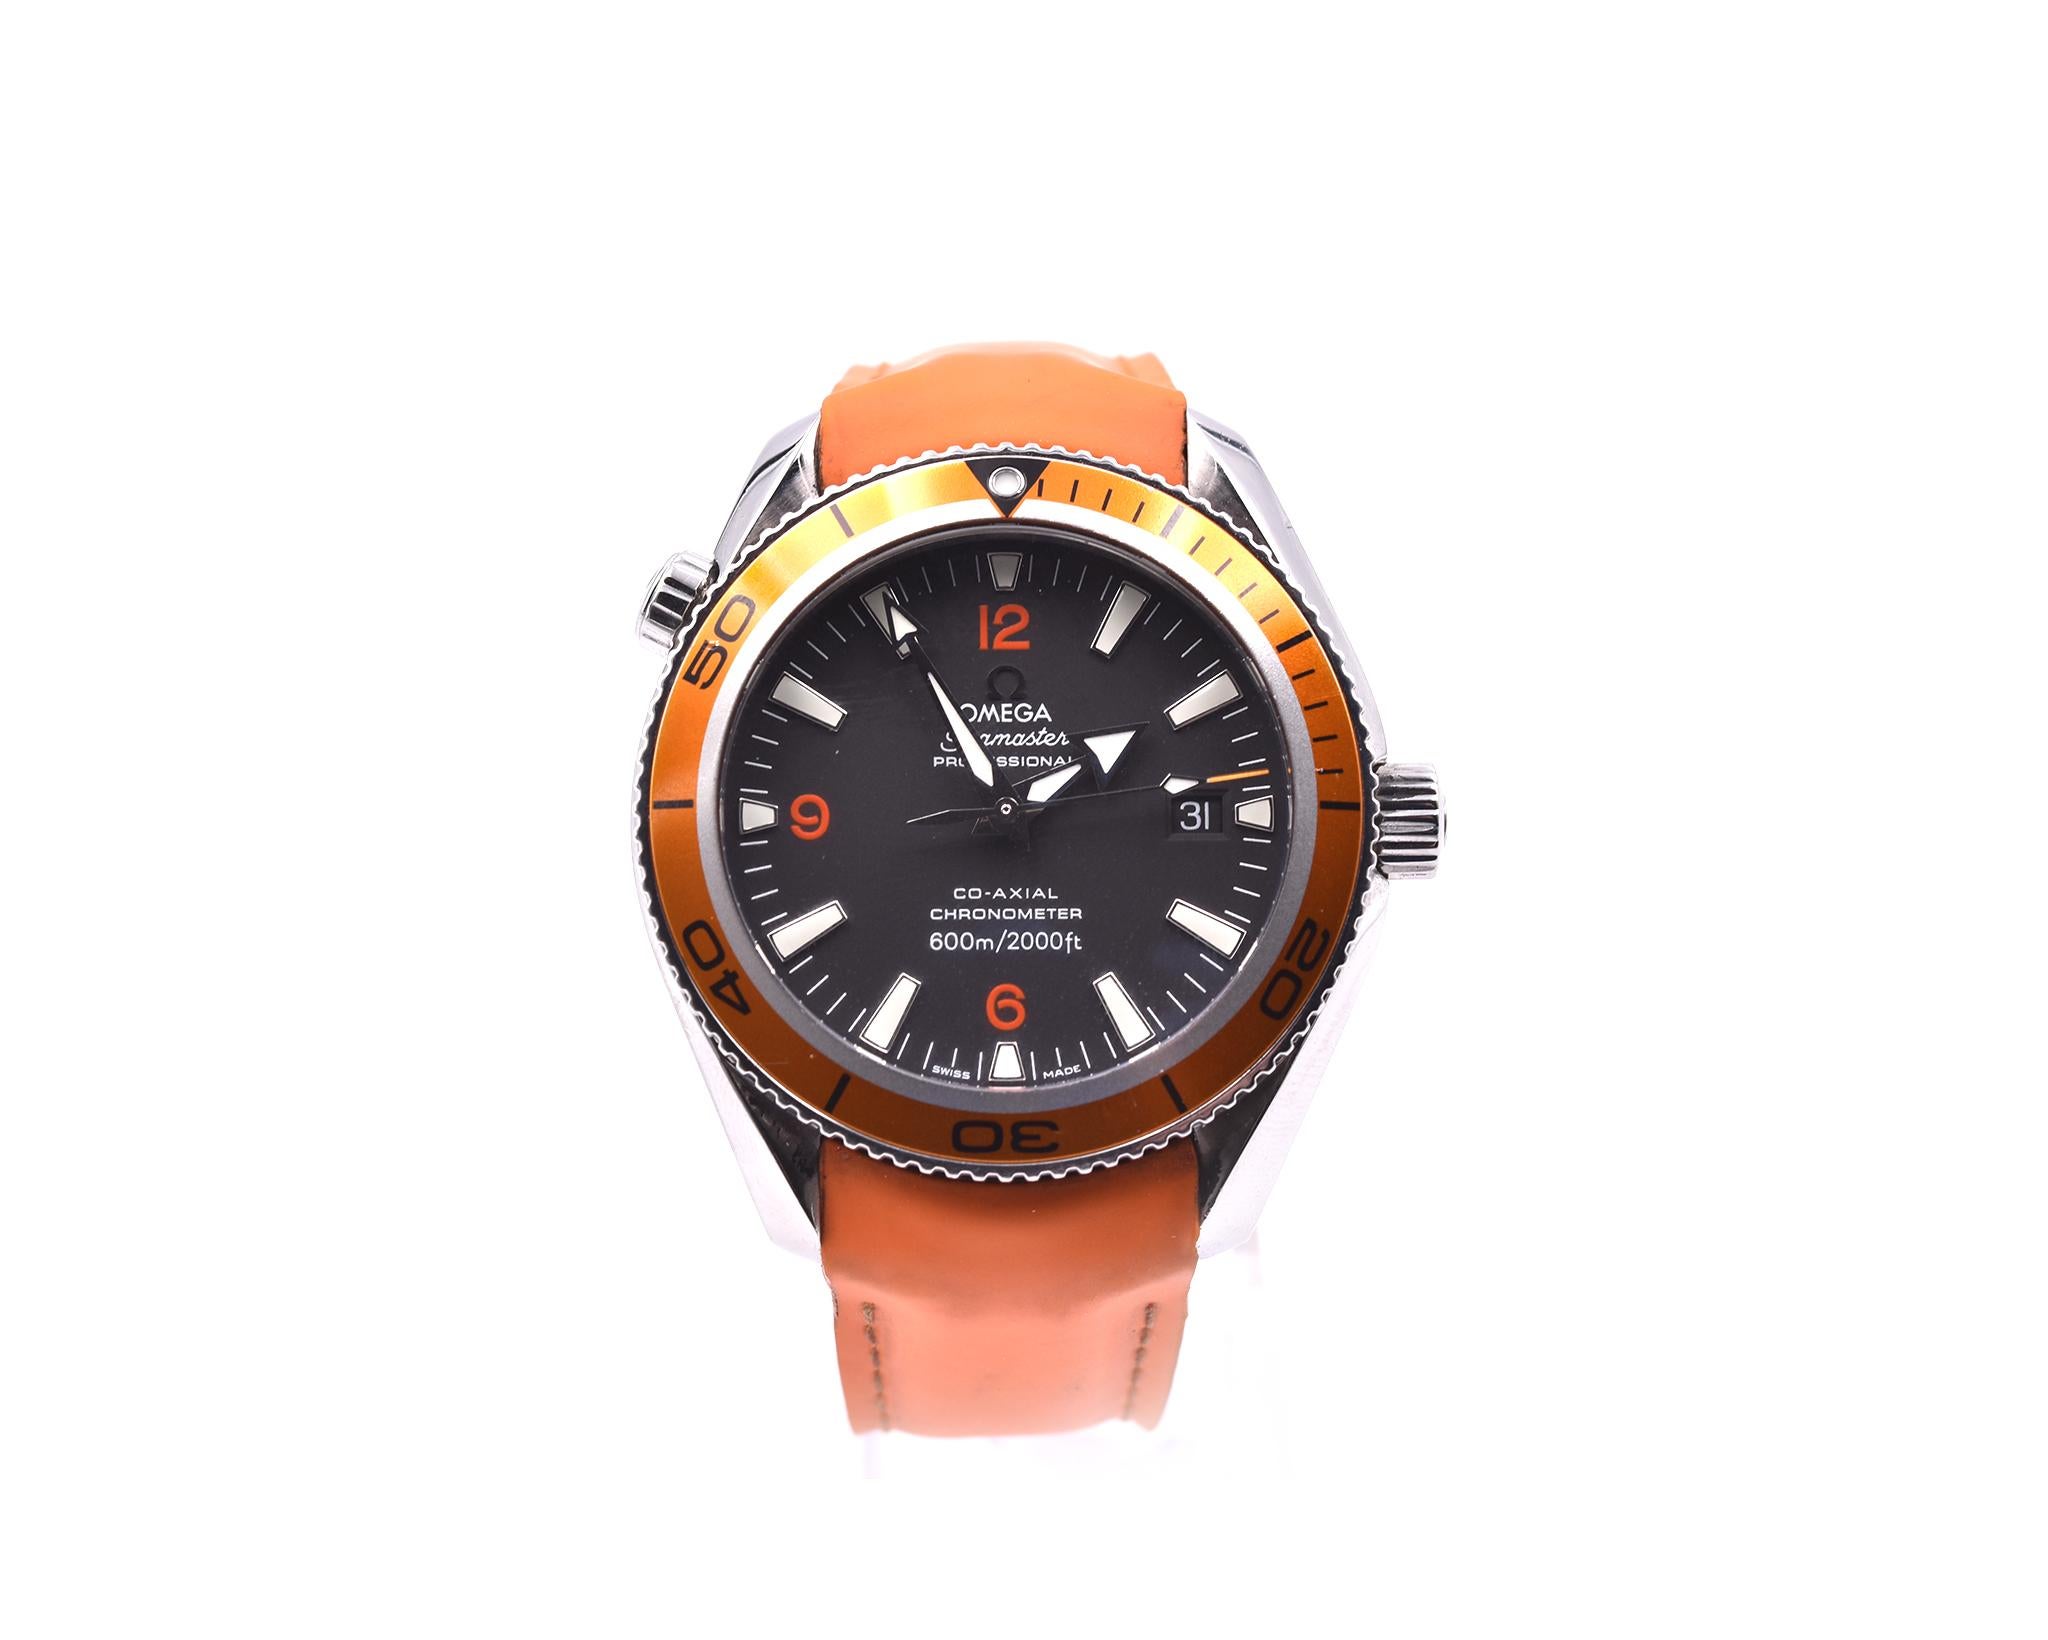 Movement: Omega 2500 self-winding movement
Function: hours, minutes, seconds, date
Case: round 42mm stainless steel case with orange uni-directional bezel, sapphire protective crystal, screw-down crown, helium escape valve, water resistant to 600